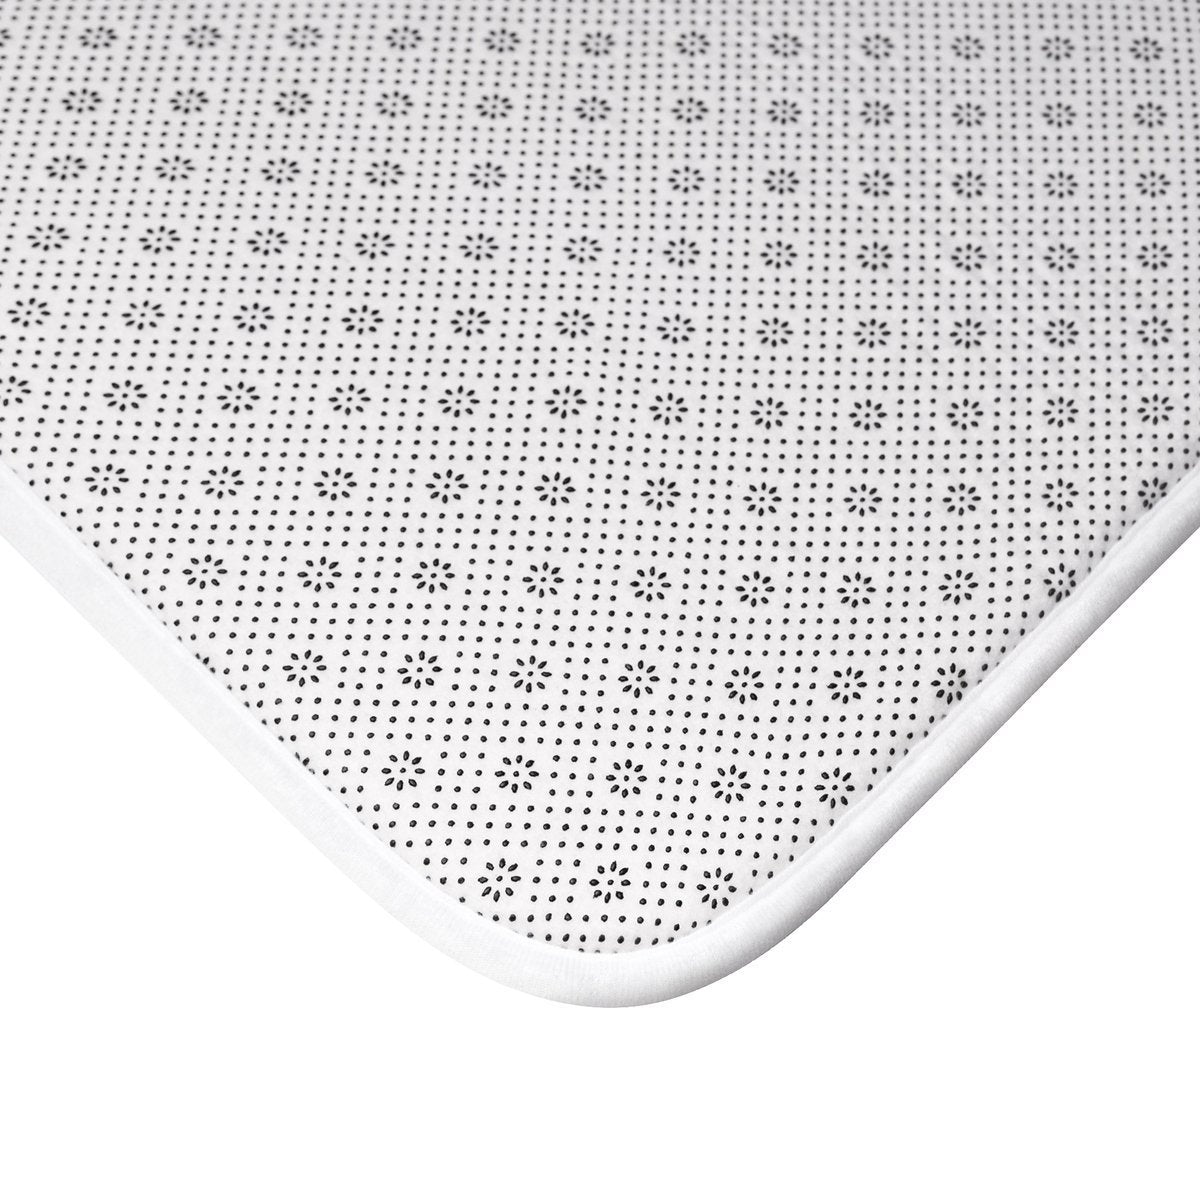 The anti slip back of an abstract cat bath mat perfect for cat lovers!